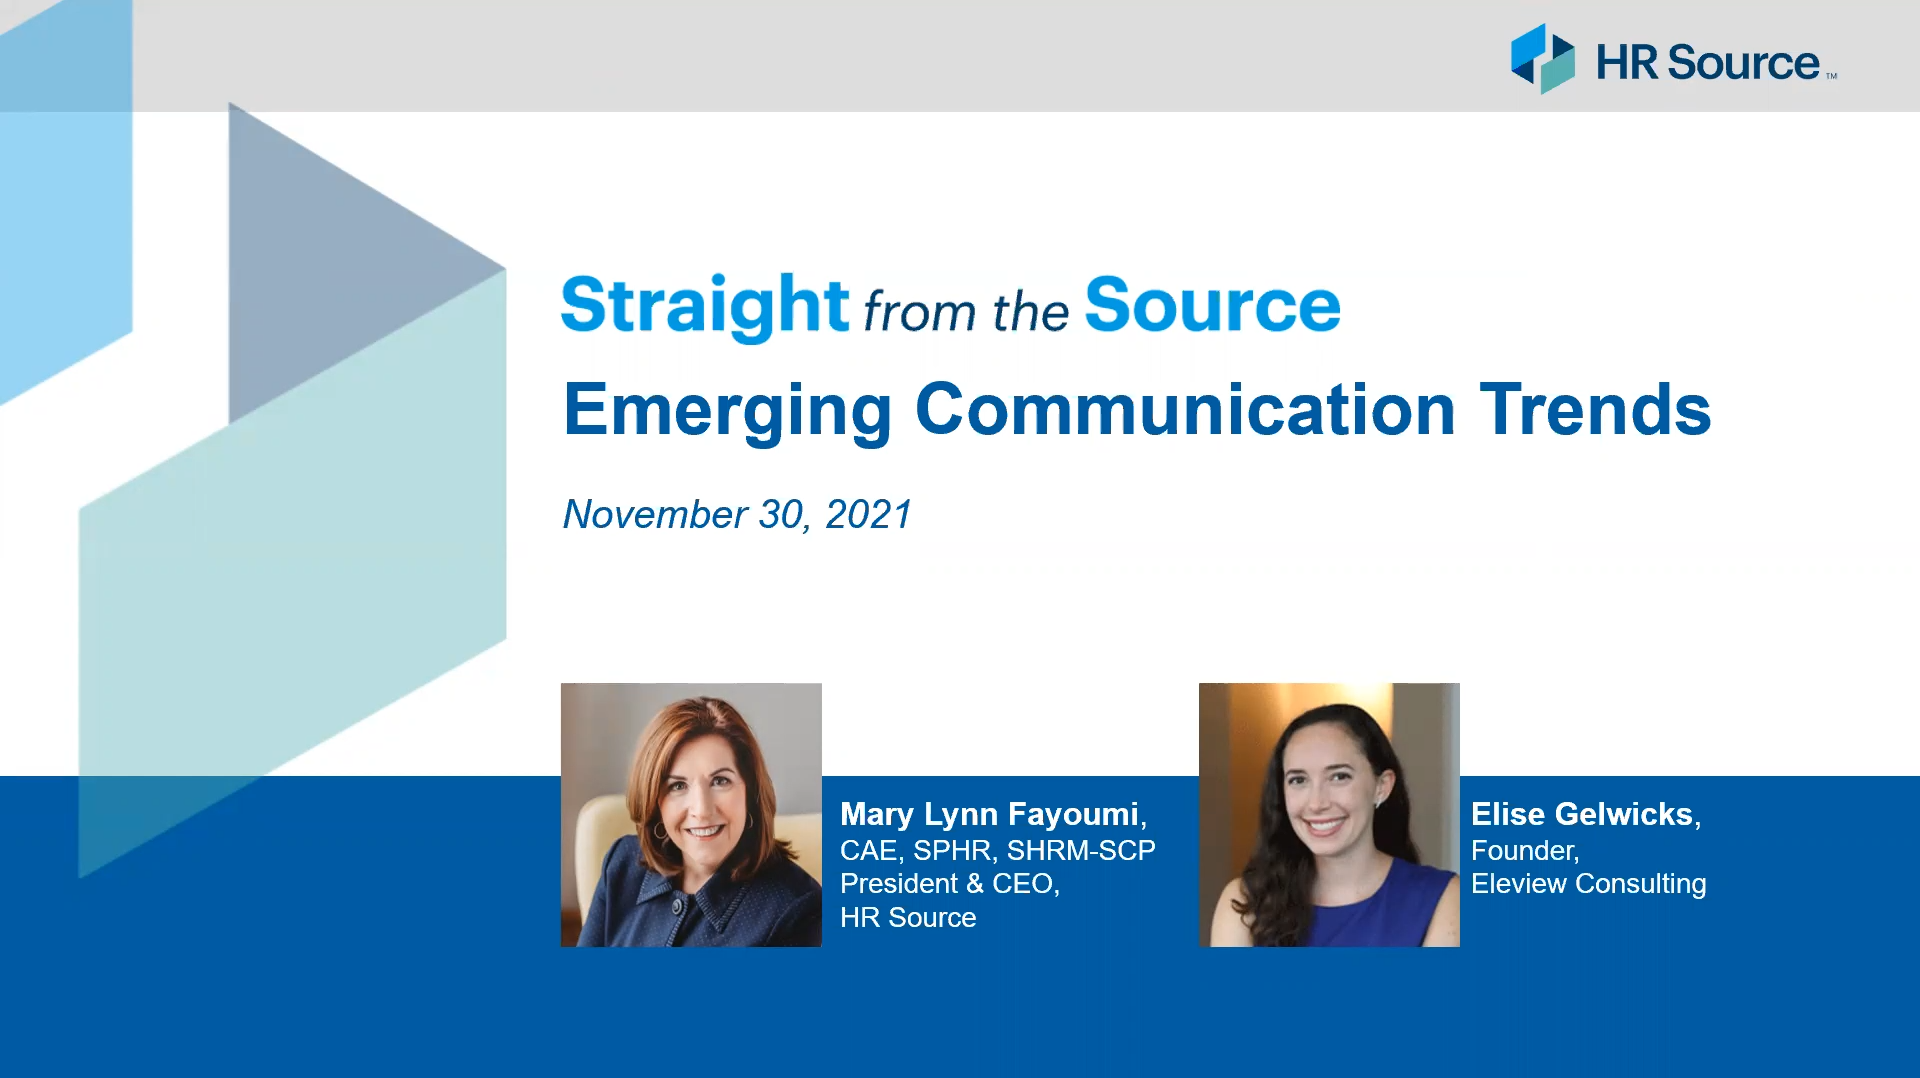 Straight from the Source: Emerging Communication Trends